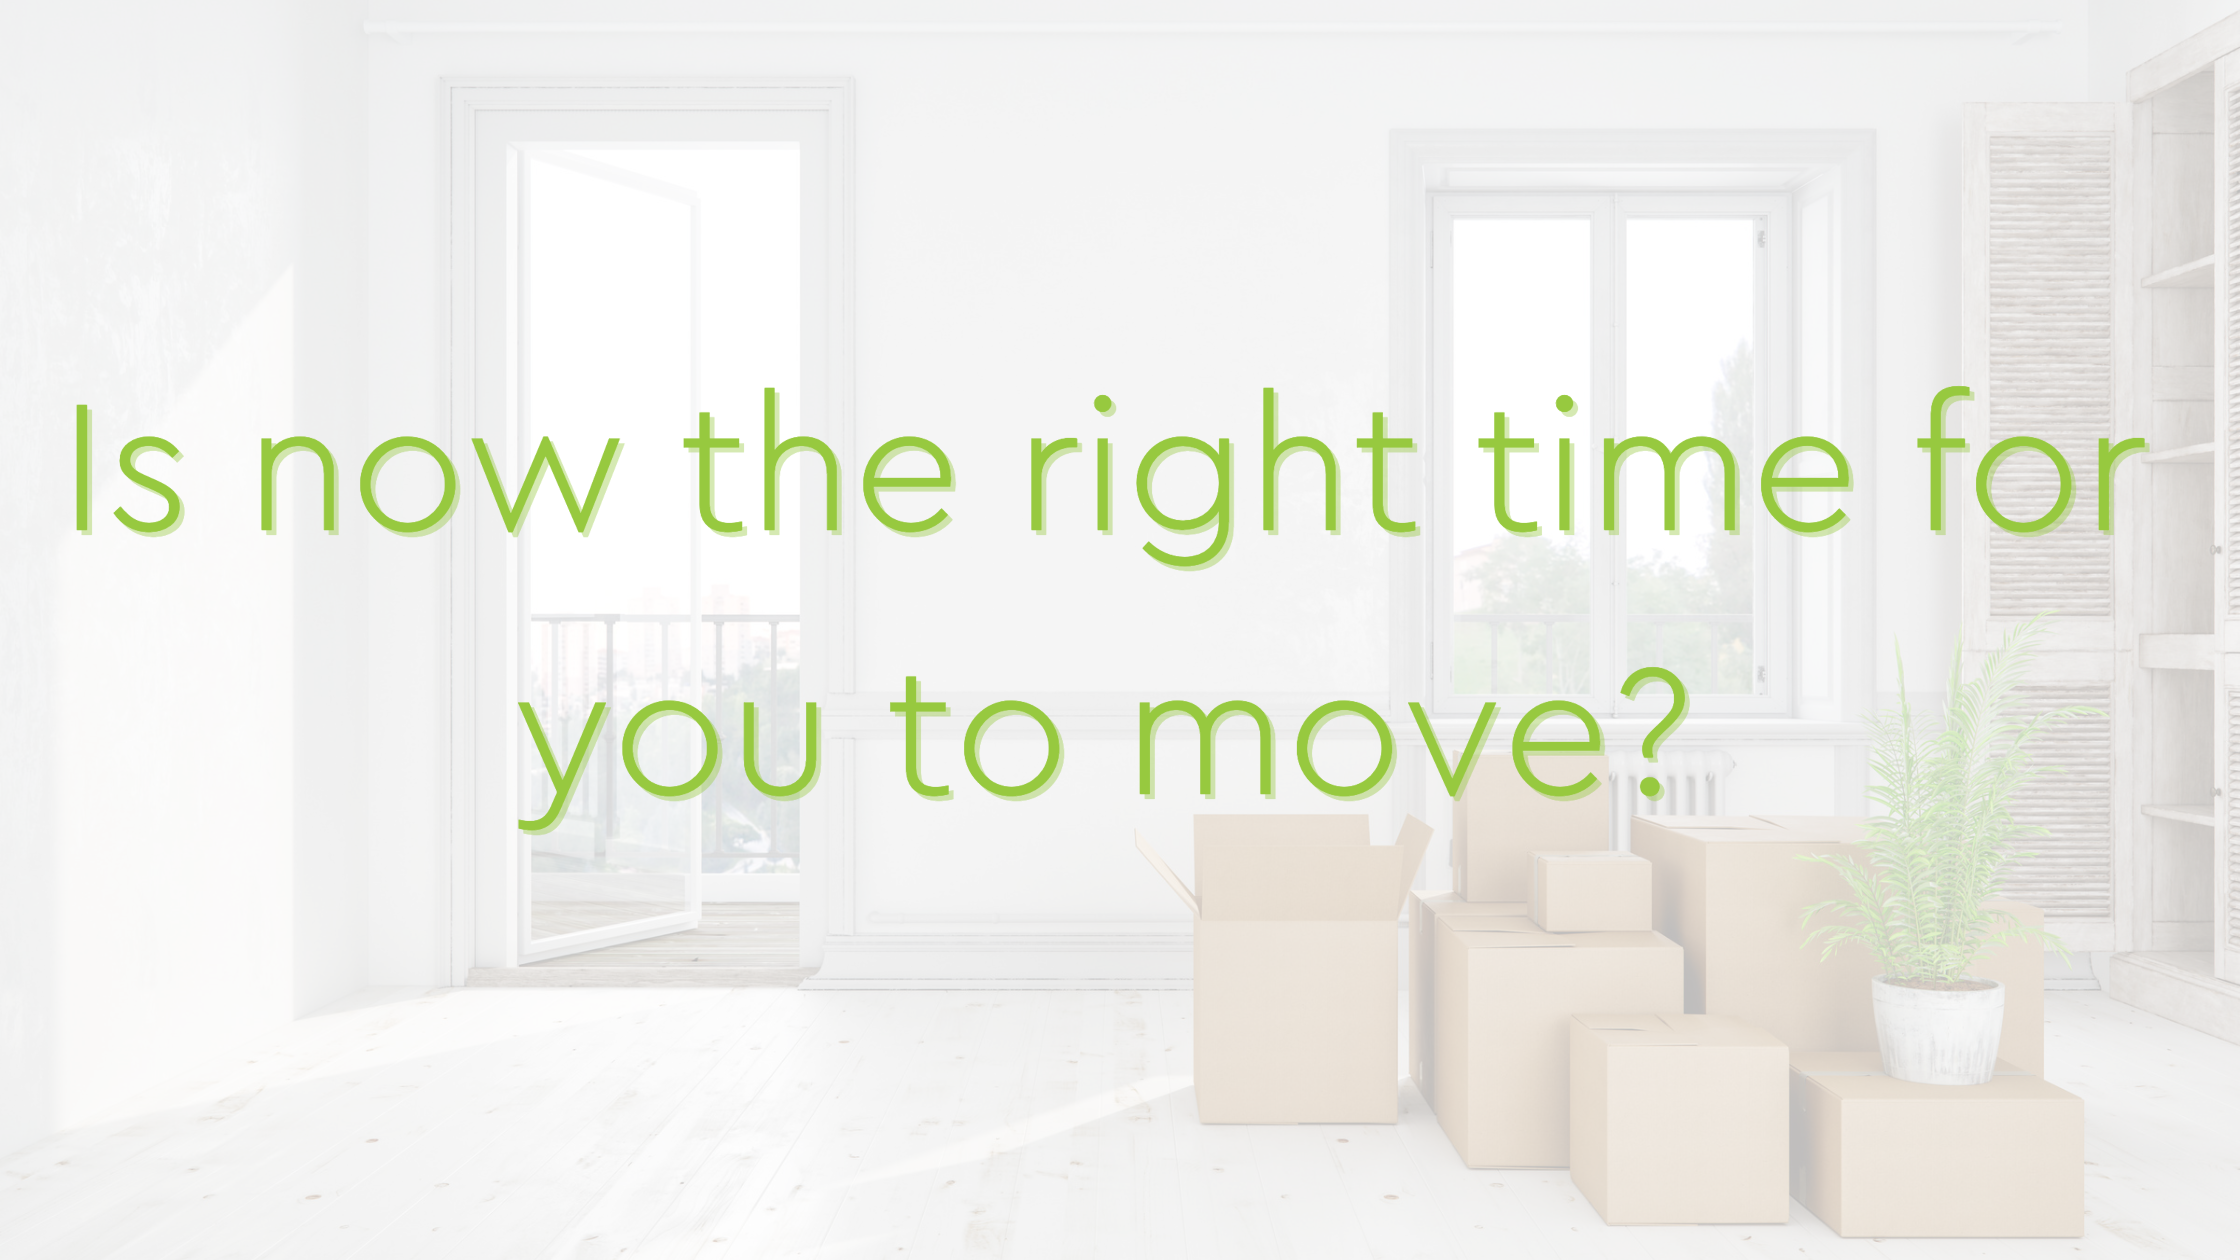 Is now the right time for you to move?